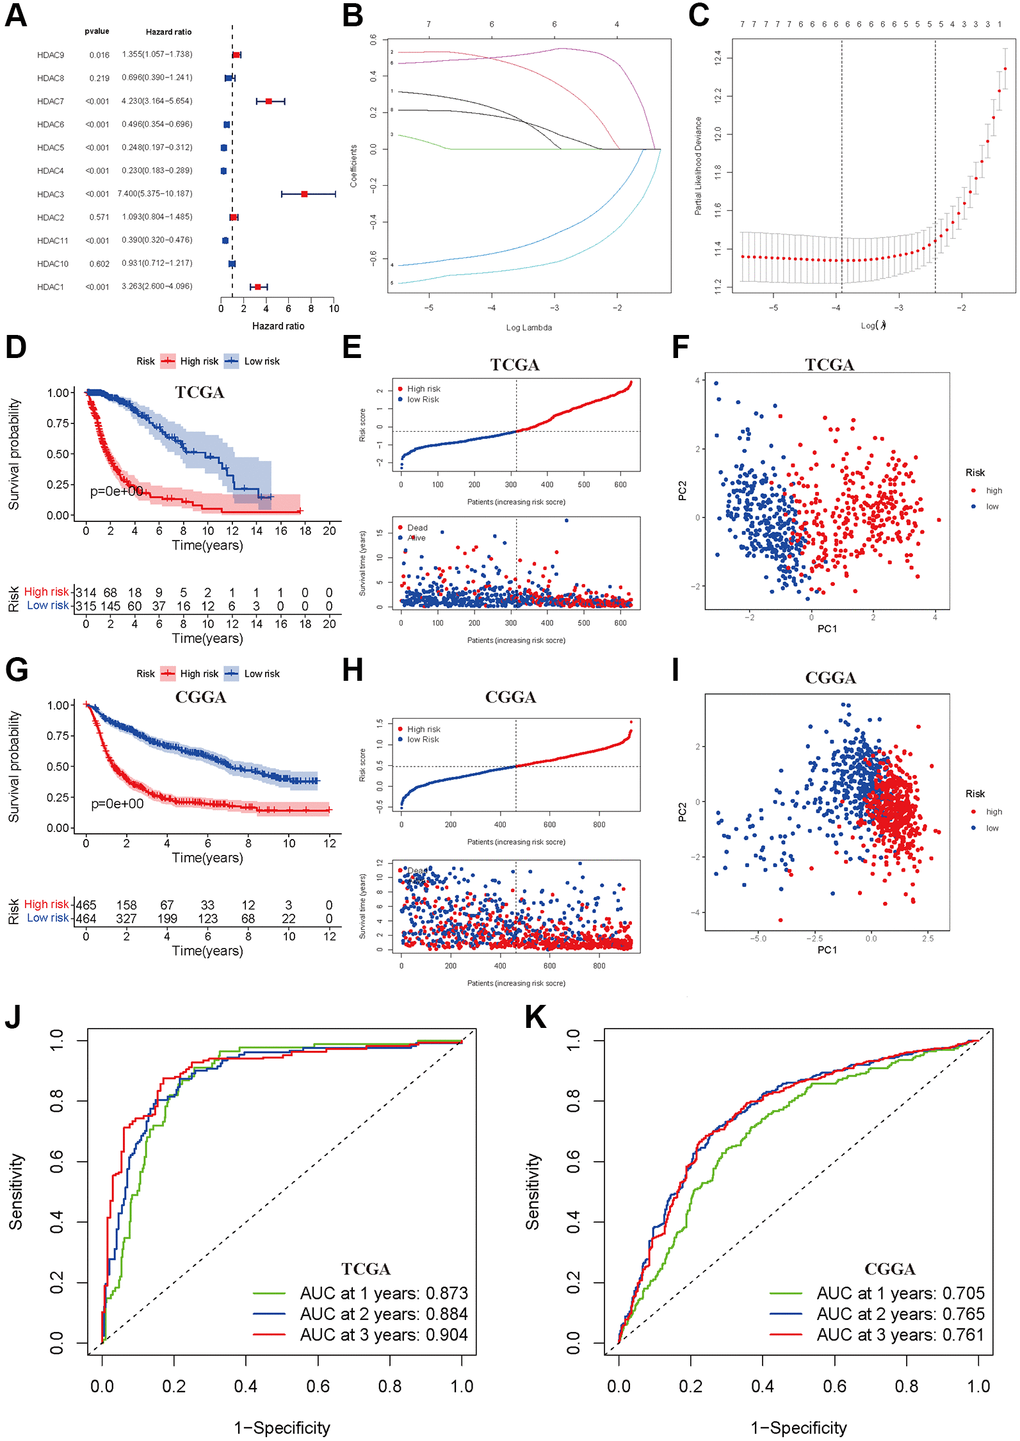 Development and validation of prognostic model based on HDAC genes. (A) Forest plot of univariate cox regression for HDAC genes in glioma patients. (B) LASSO regression of the 11 OS-related HDAC genes. (C) Cross-validation for turning parameters selection in the LASSO regression. (D) Kaplan-Meier survival curve of high- and low-risk groups from developed prognostic model based on 6 HDAC genes in TCGA. (E) Distributions of risk scores and survival time of glioma patients in TCGA. (F) PCA plot for high- and low-risk group in TCGA. (G) Kaplan-Meier survival curve of high- and low-risk groups from validated prognostic model based on 6 HDAC genes in CGGA. (H) Distributions of risk scores and survival time of glioma patients in CGGA. (I) PCA plot for high- and low-risk group in CGGA. (J and K) The receiver operating characteristic curve for predicting 1-year, 2-year, and 3-year survival rate of glioma patients in TCGA and CGGA.